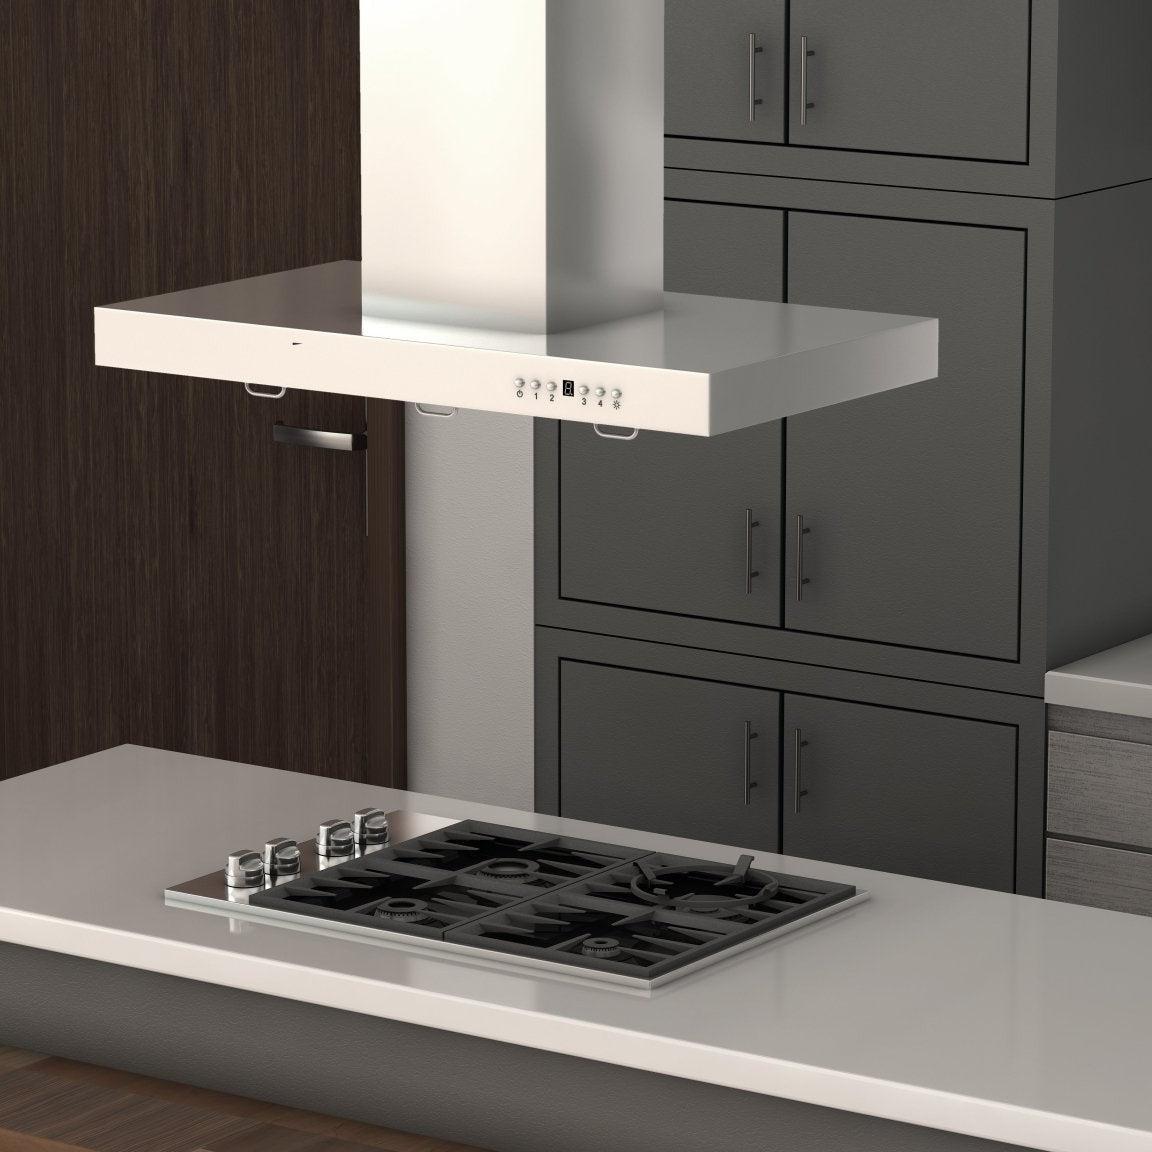 ZLINE Convertible Vent Island Mount Range Hood in Stainless Steel (KE2i) in modern luxury kitchen above cooktop with white countertop side view